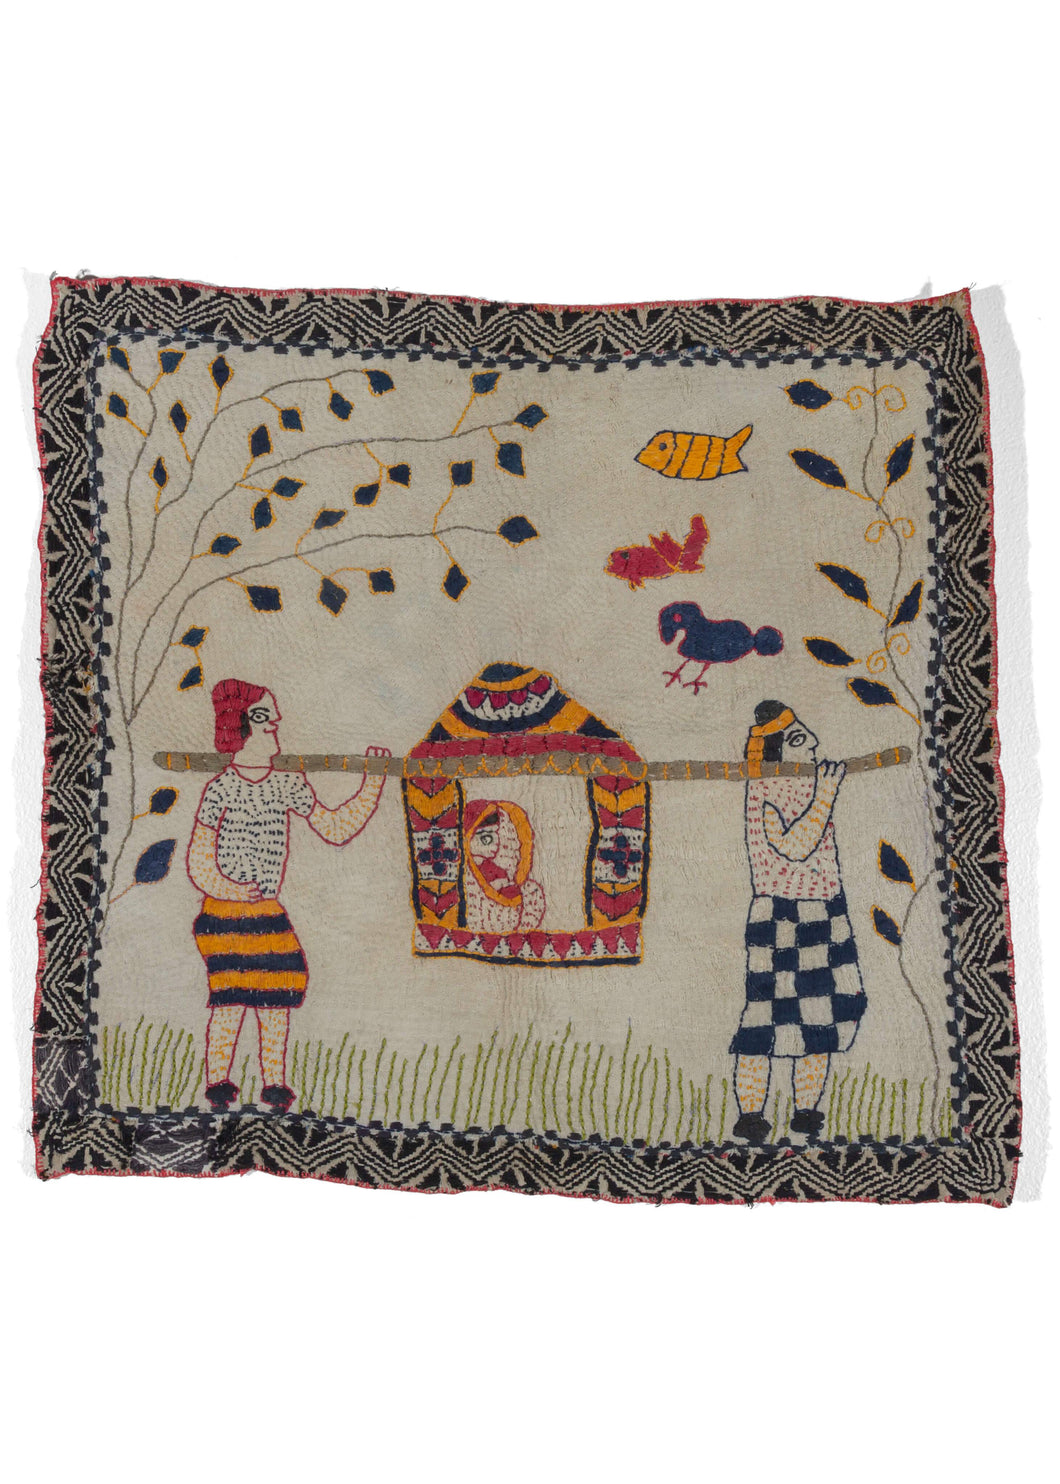 Antique Bengali hand embroidered Nakshi Kantha featuring birds flying above two carriage carriers with a bride inside atop a hand quilted off-white cotton field